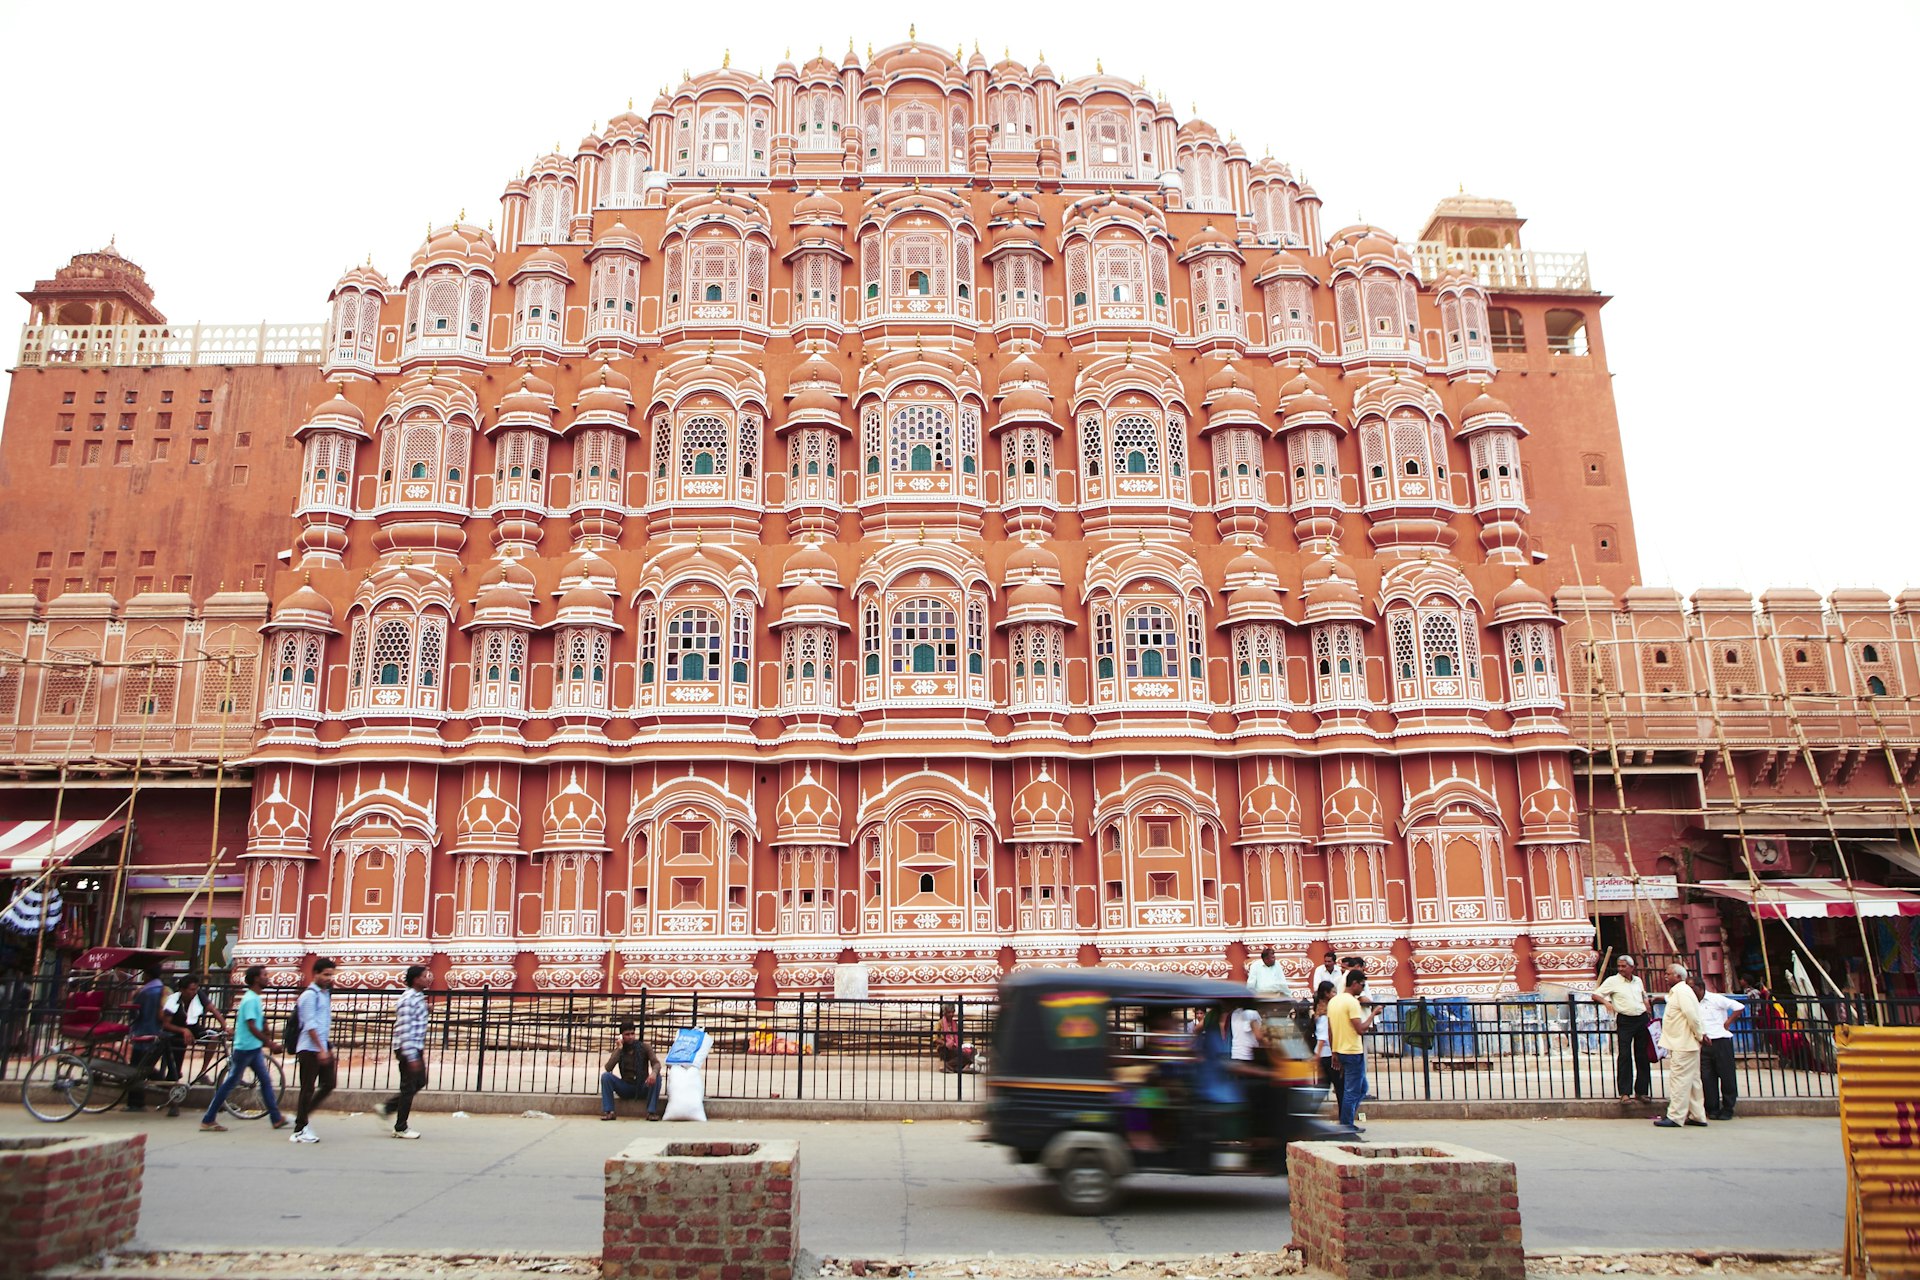 People pass the exterior of the Palace of Winds (Hawa Mahal), Jaipur, Rajasthan, India